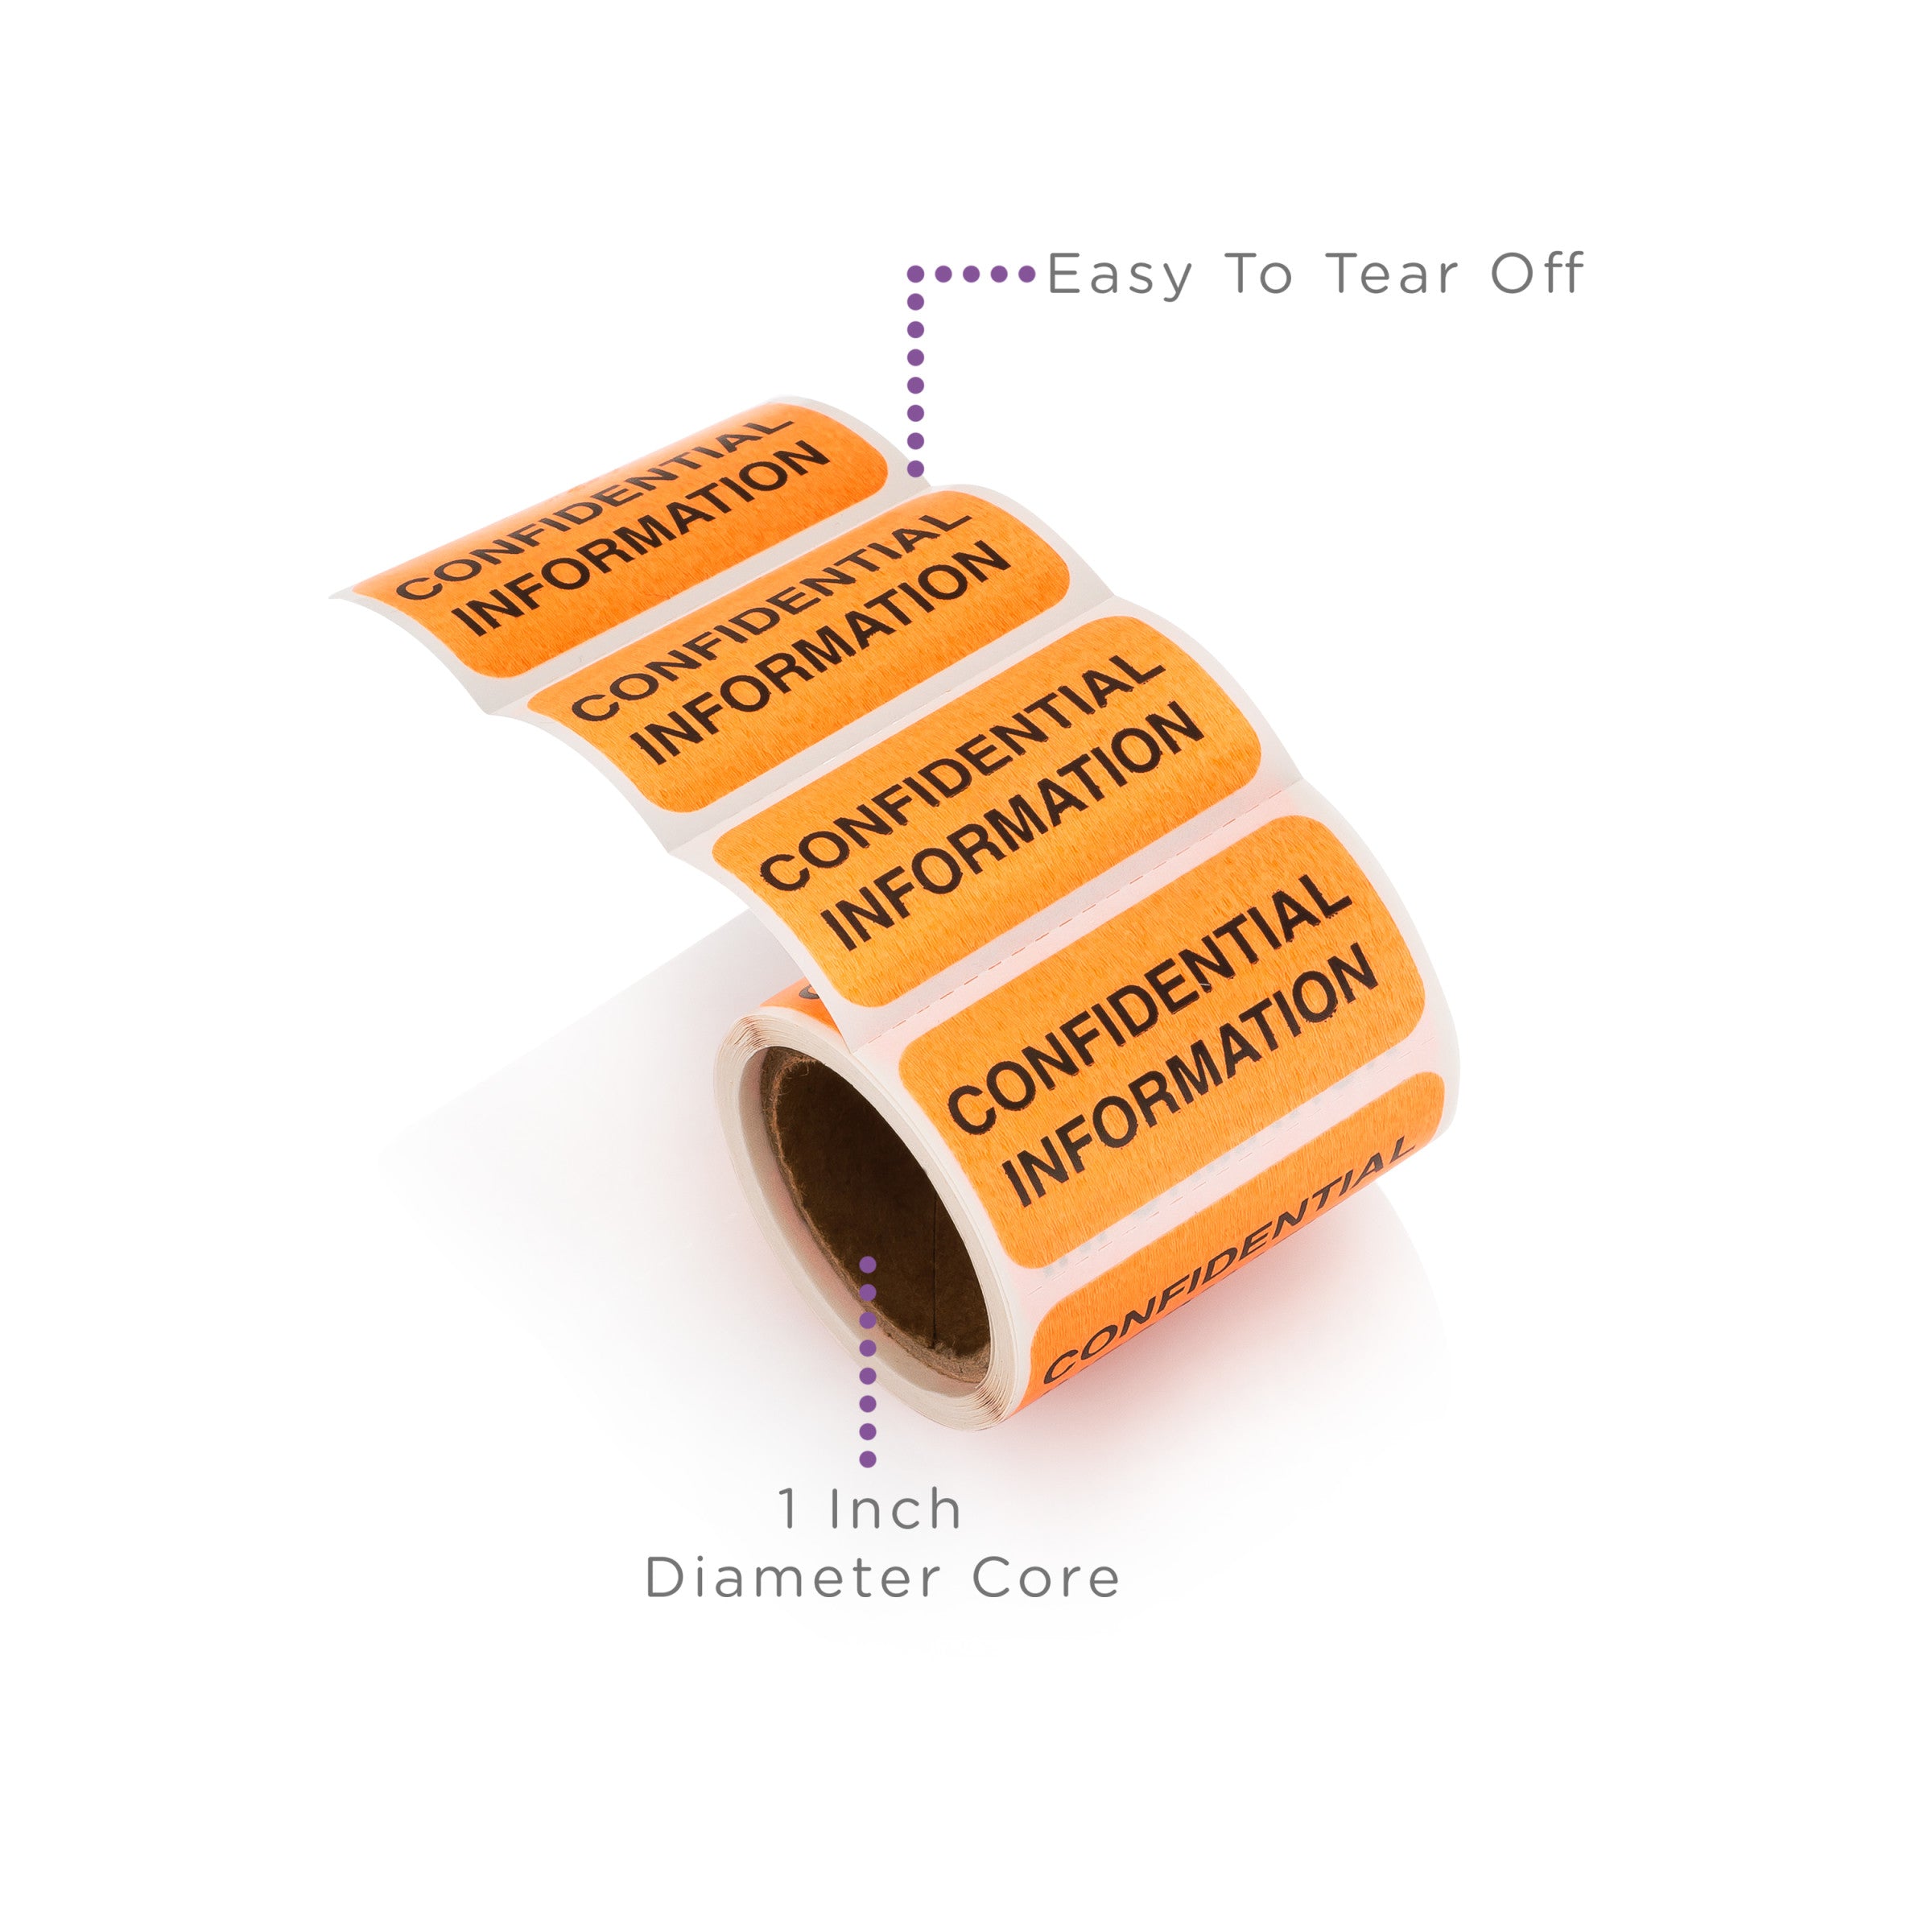 Confidential Information Alert and Instruction Labels, Orange, W1.5" x H.75" (Roll of 100)